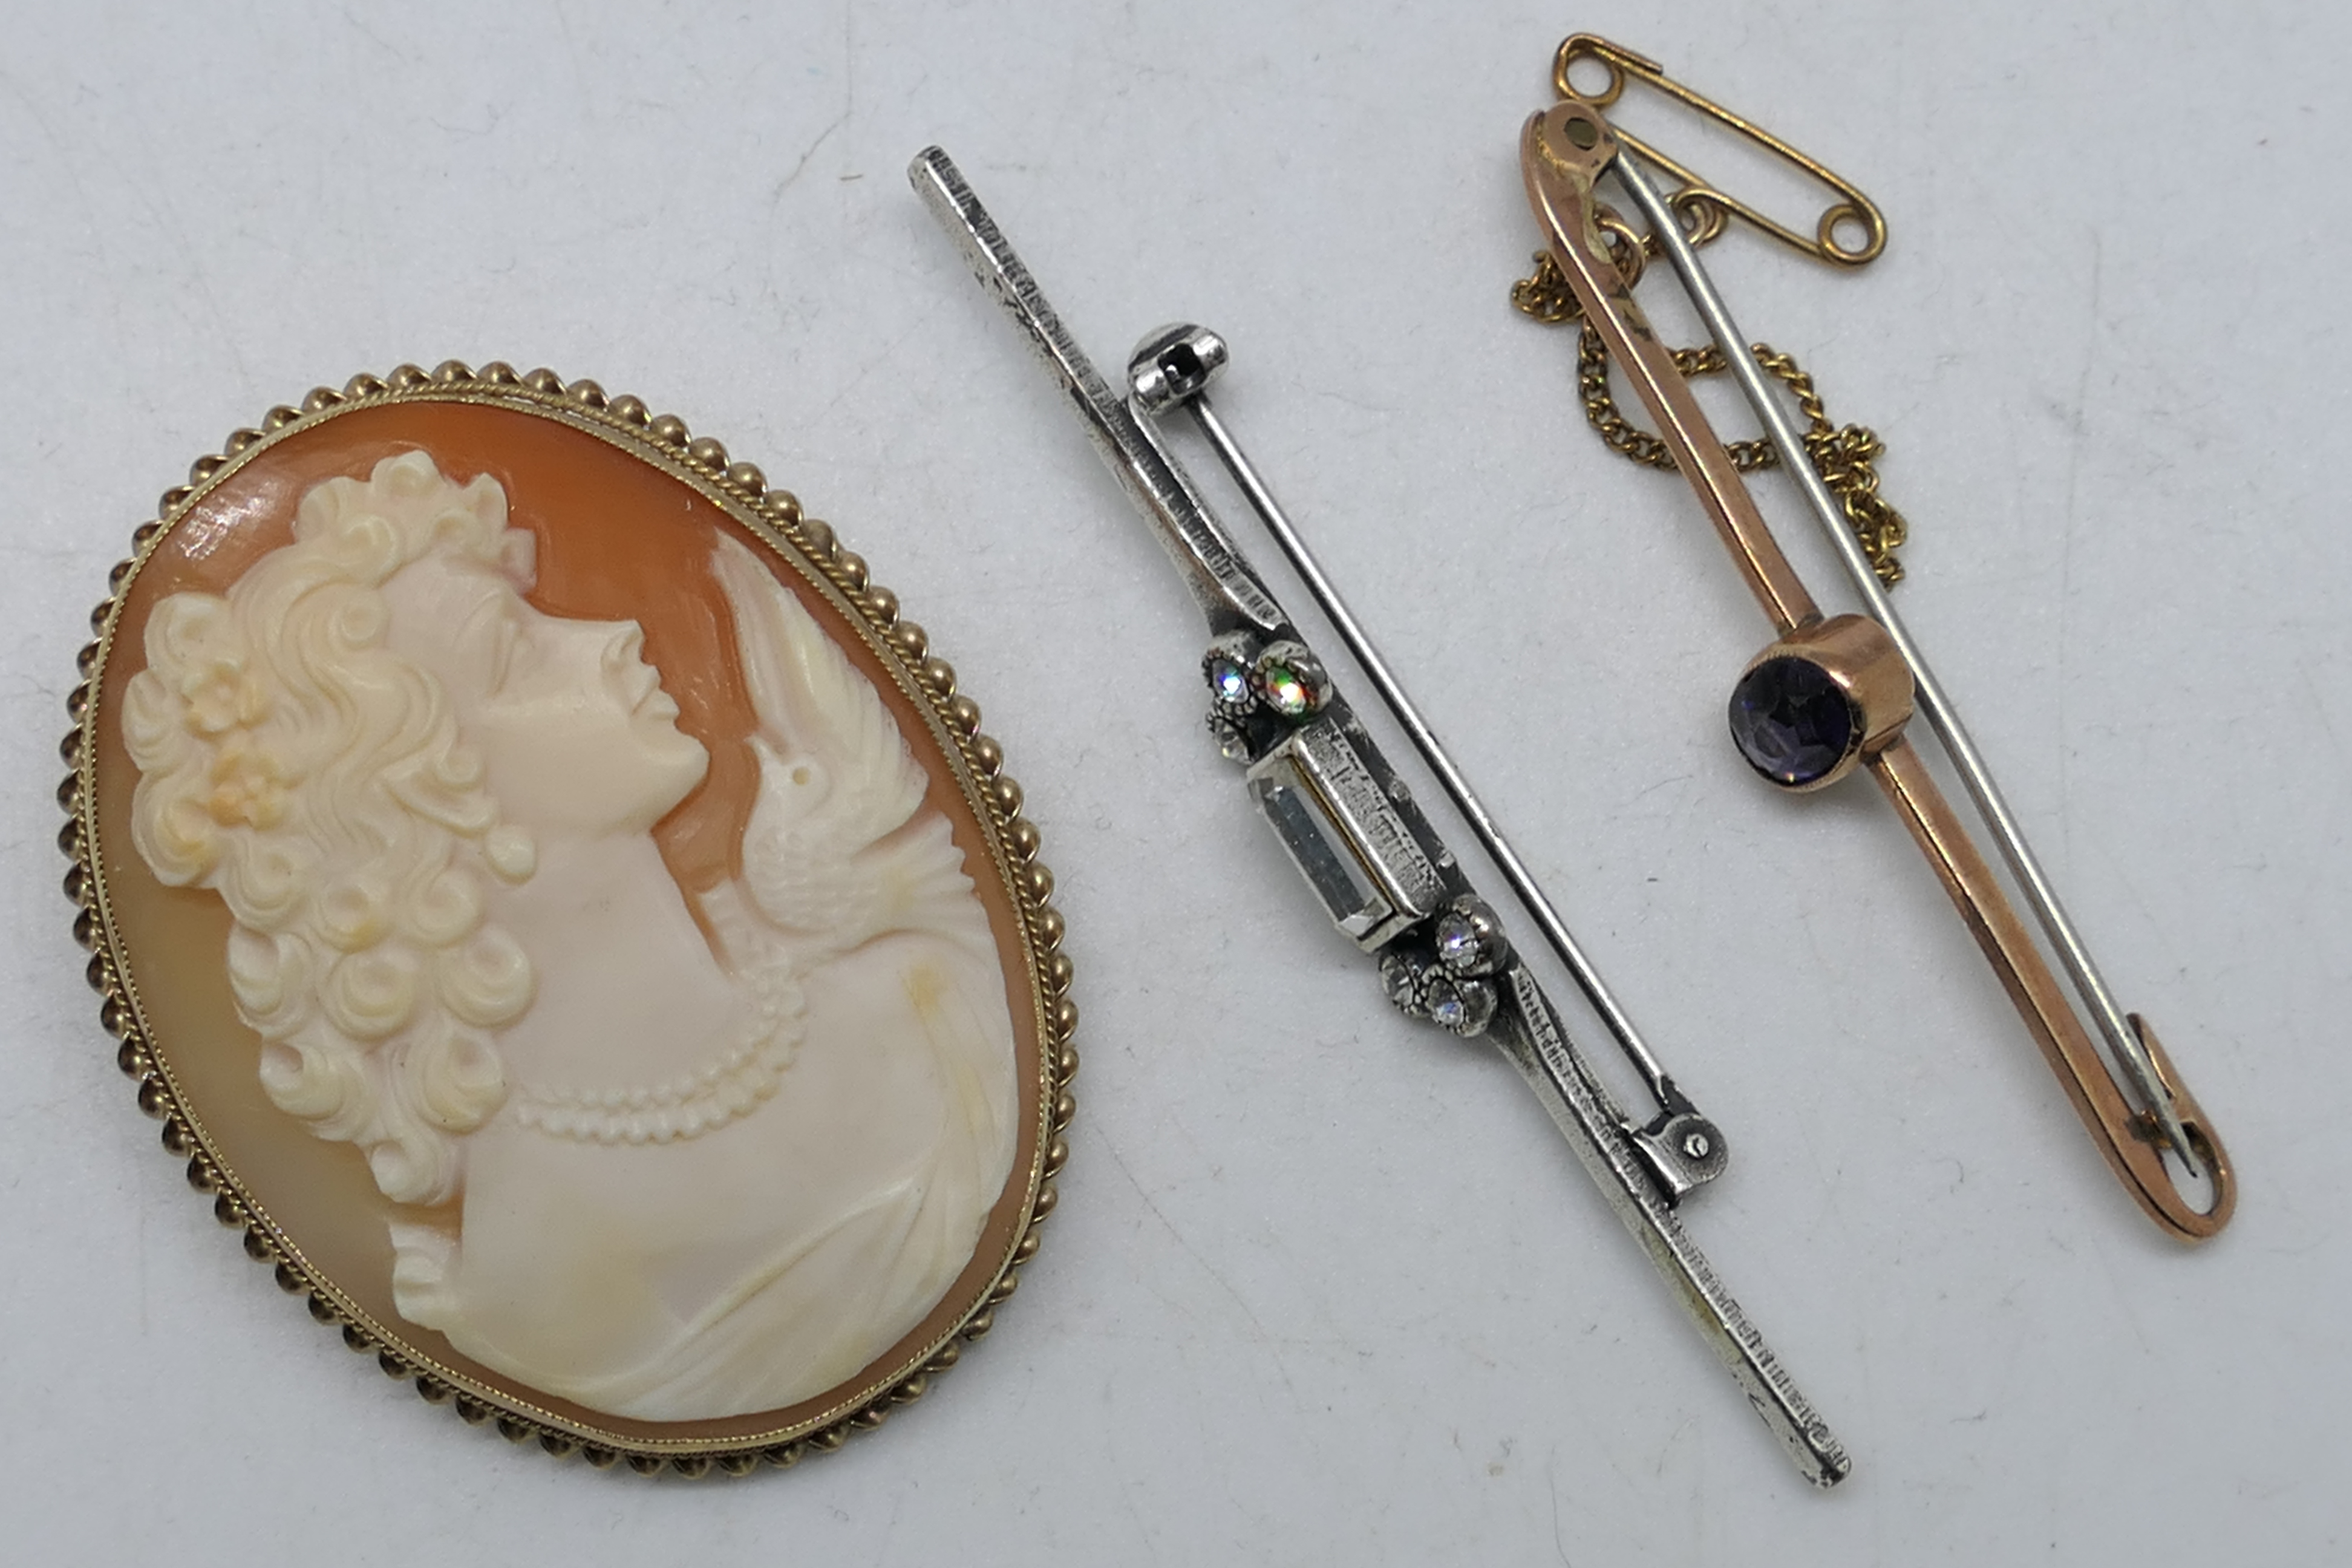 A 9ct gold mounted cameo brooch, 4.3 cm x 3.3 cm, approximately 8.